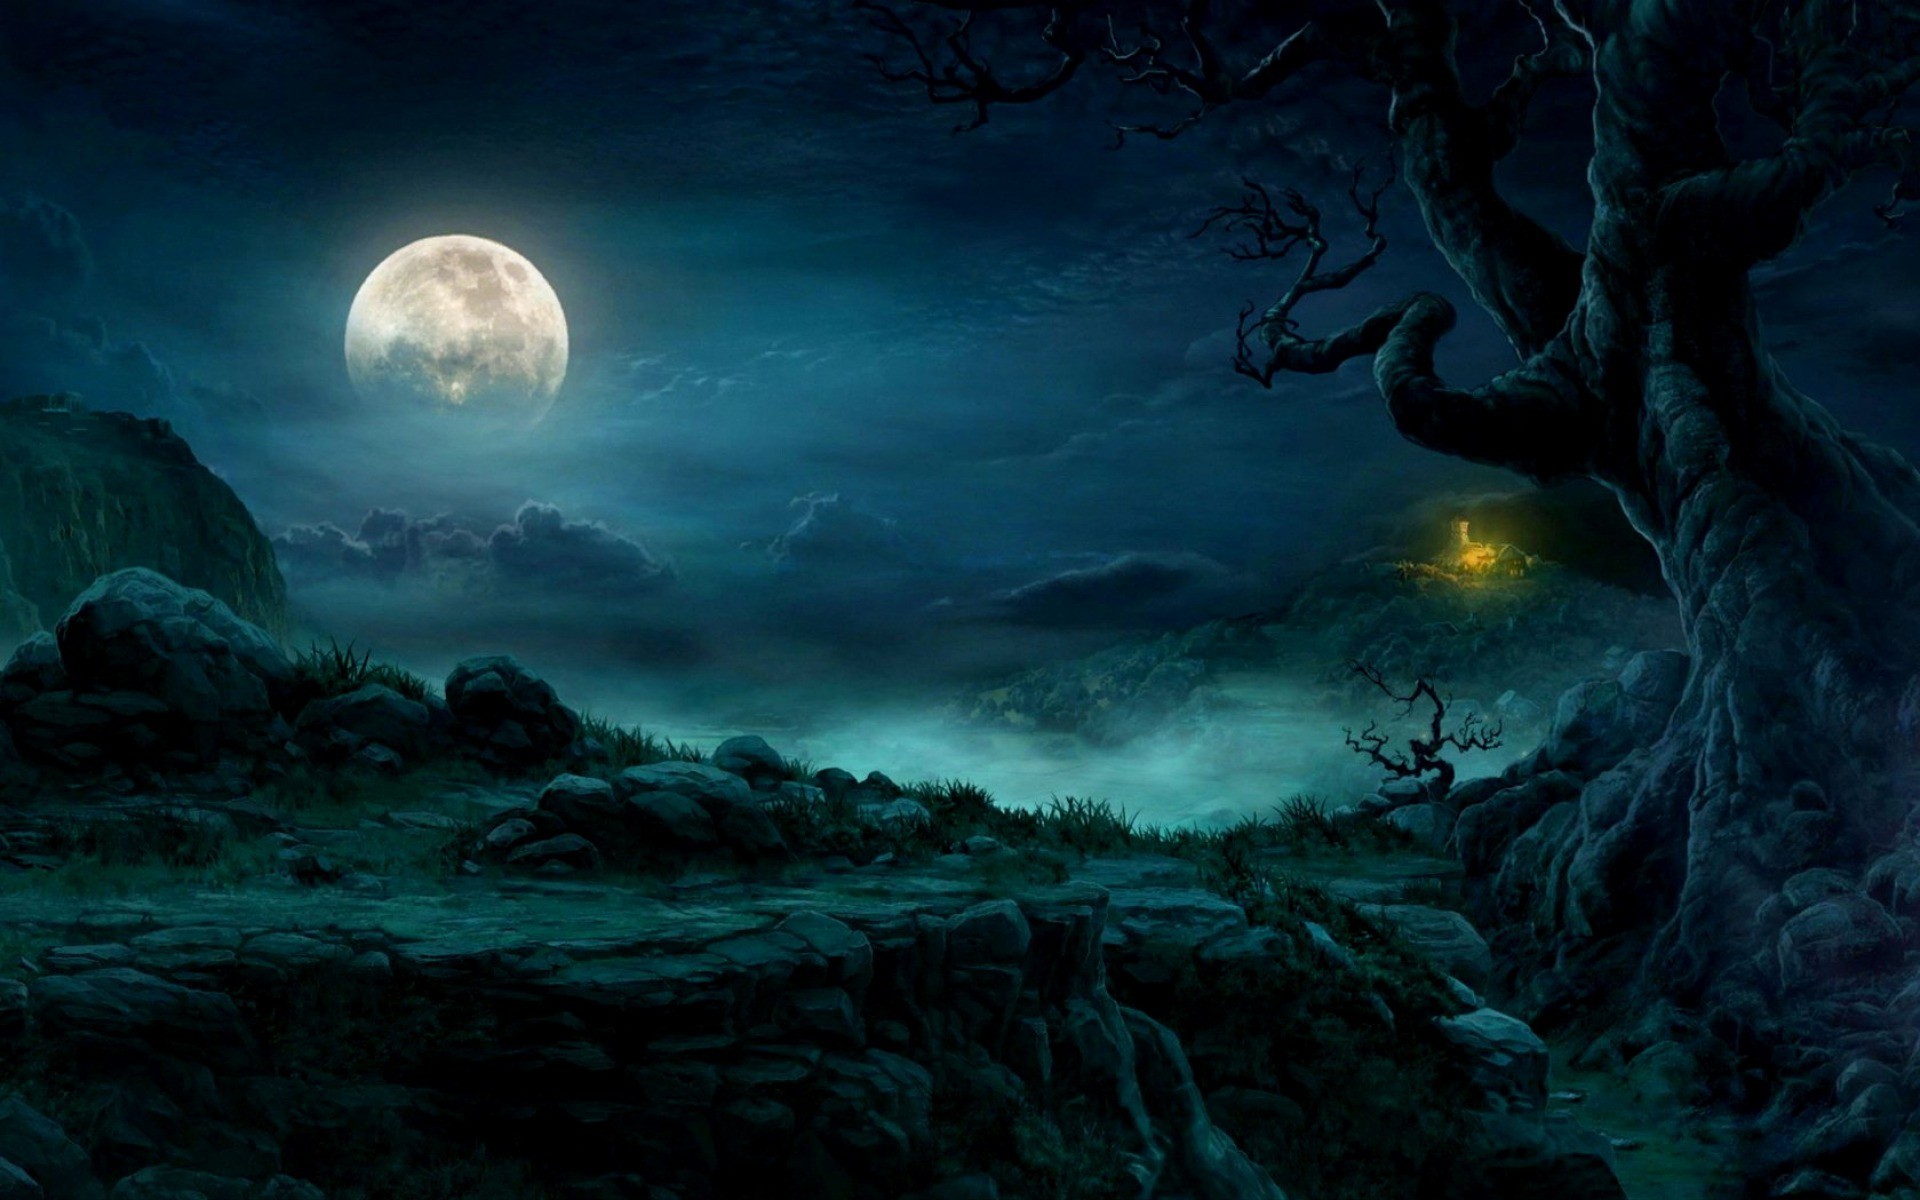 Mysterious Night Full Moon Wallpaper And Stock Photos Forest